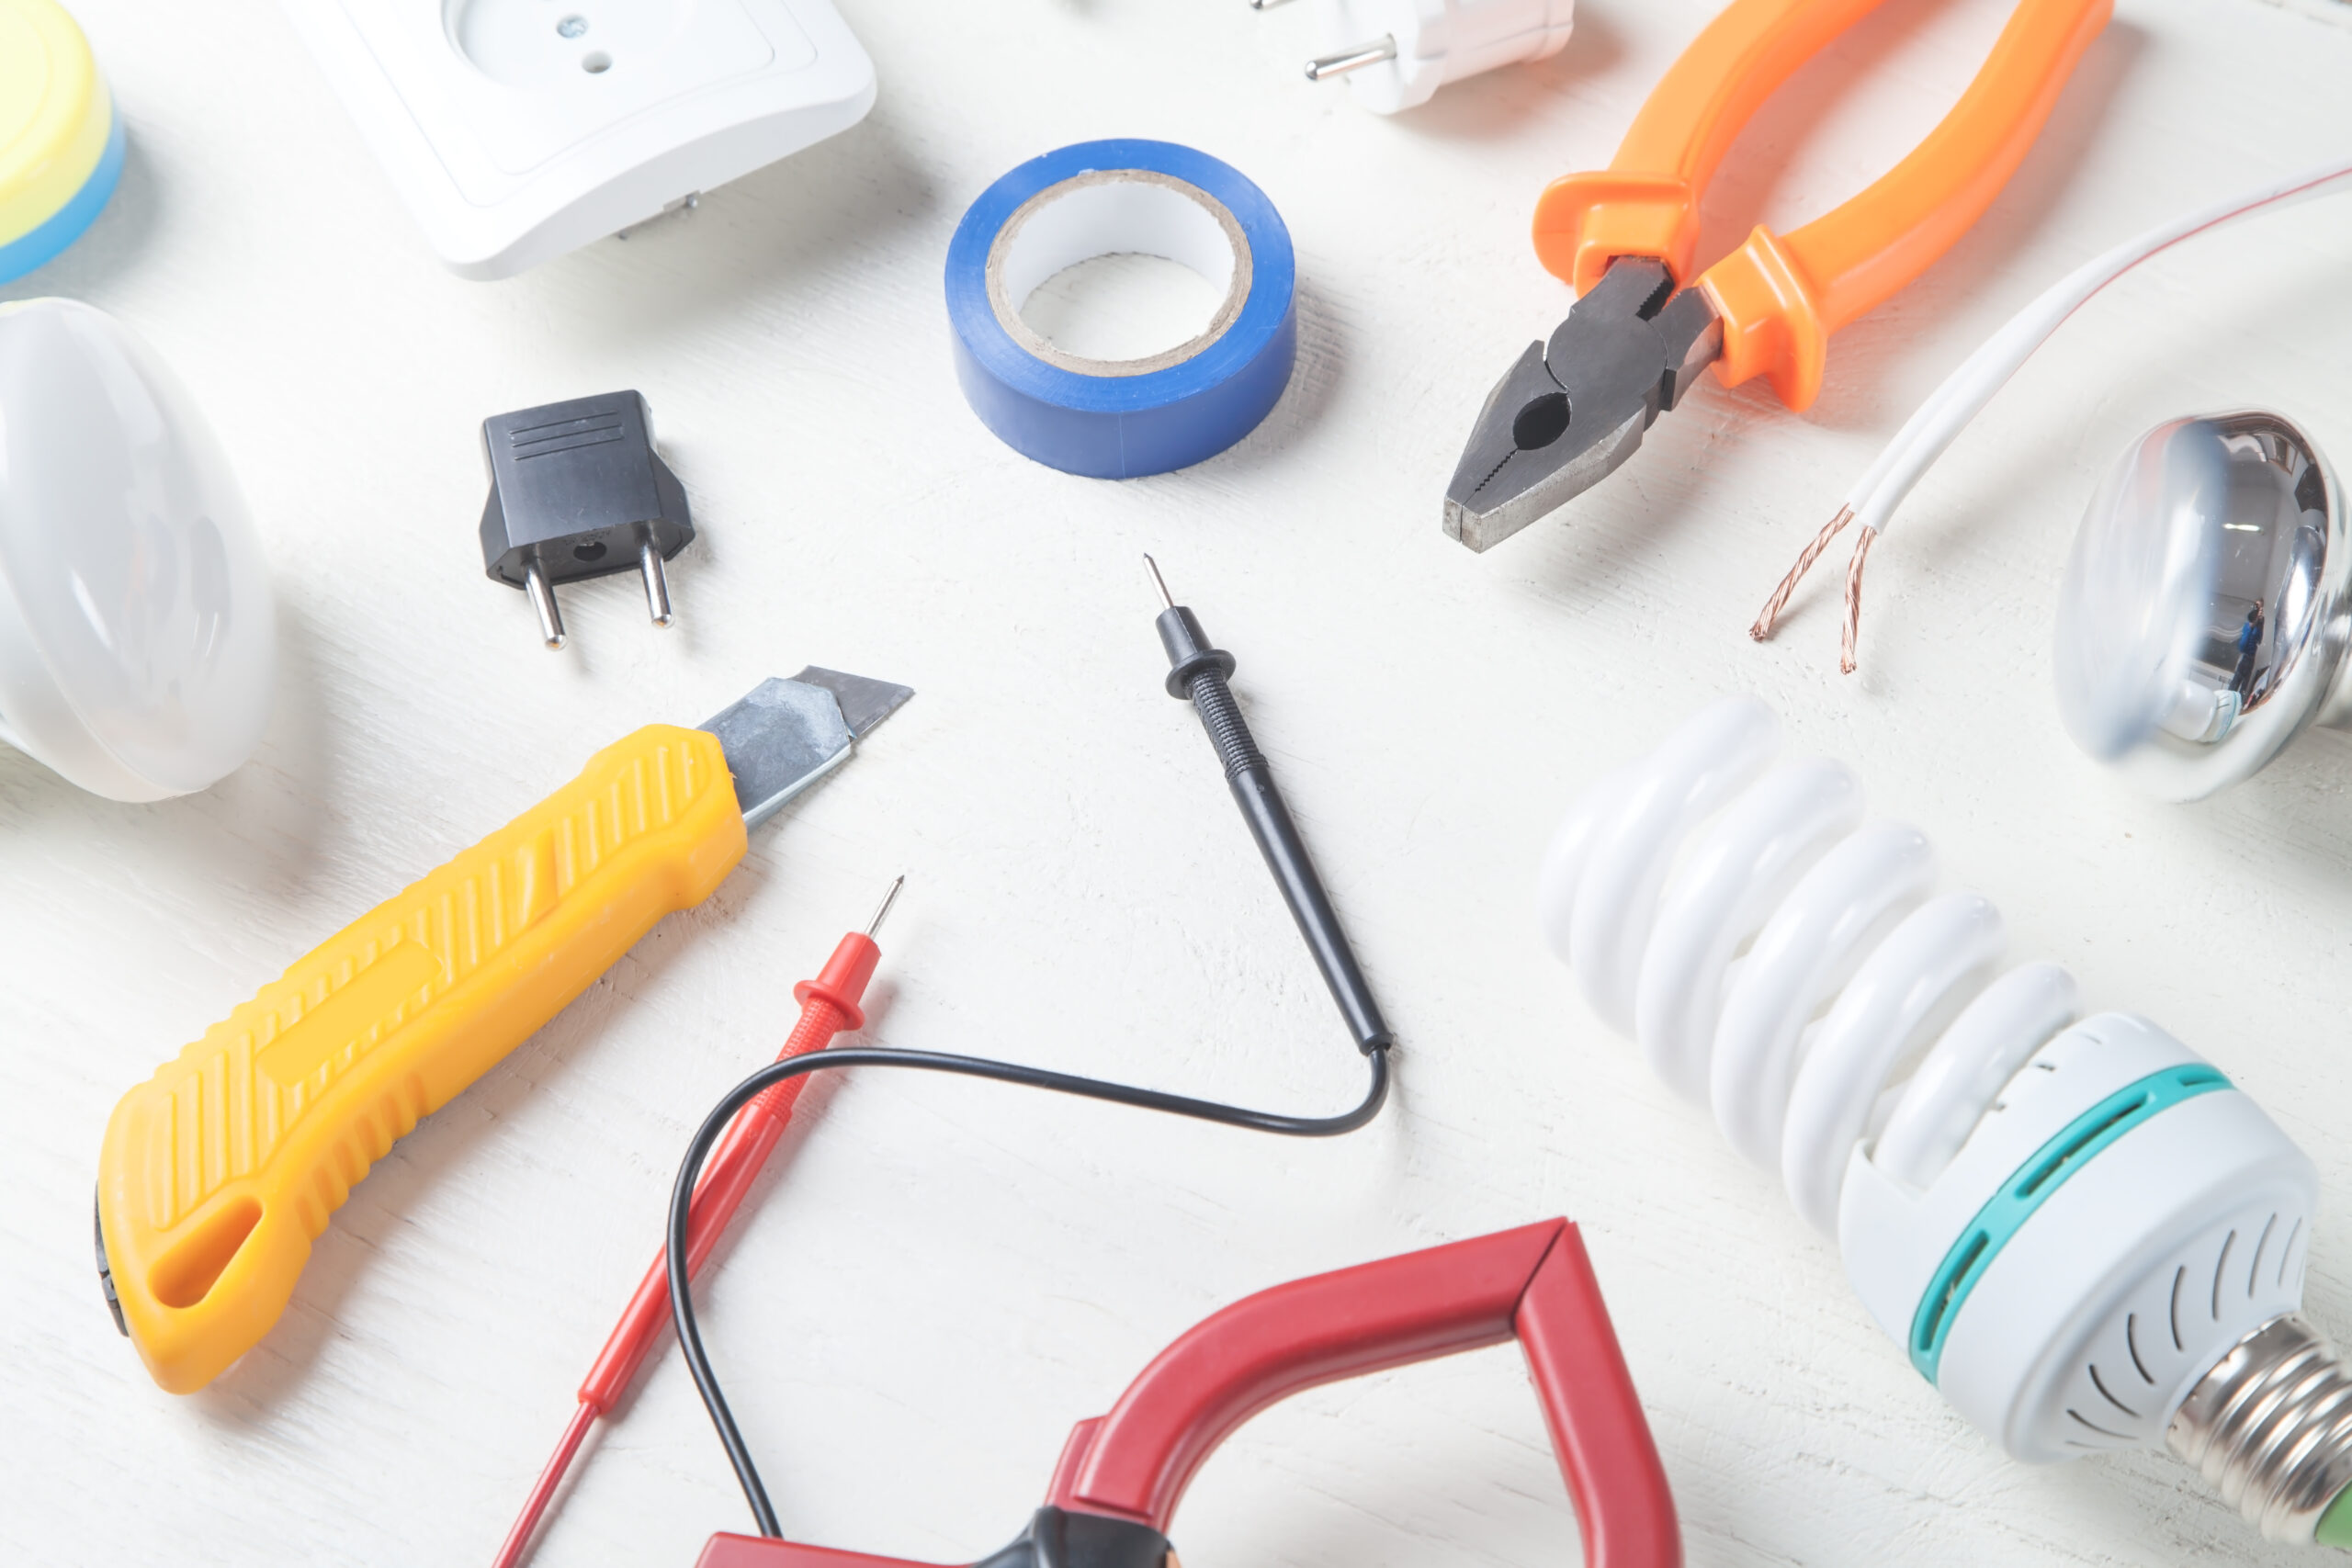 Working tools and components. Electrical objects